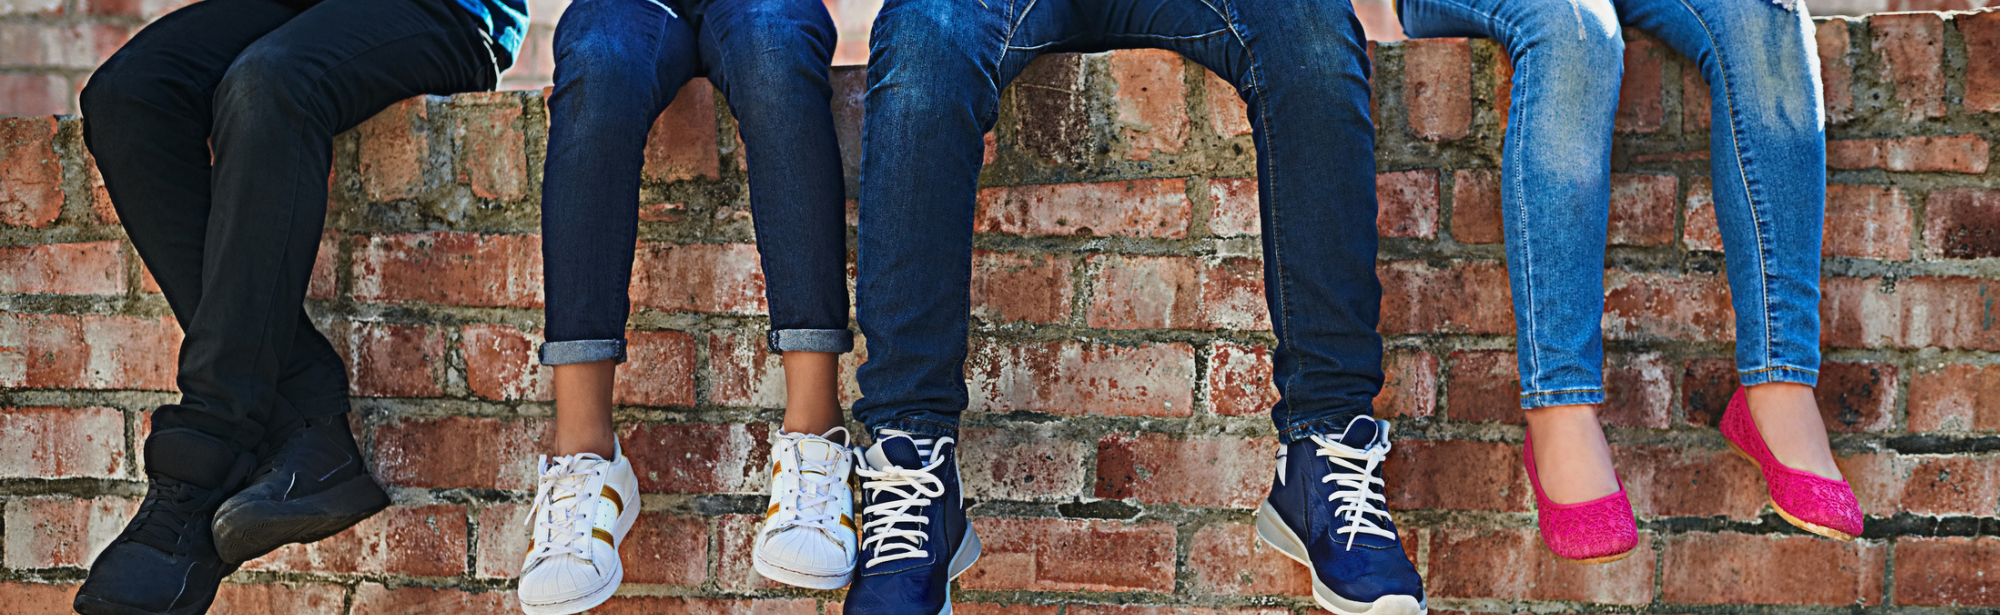 Youth sitting on brick wall, view of their legs and feet